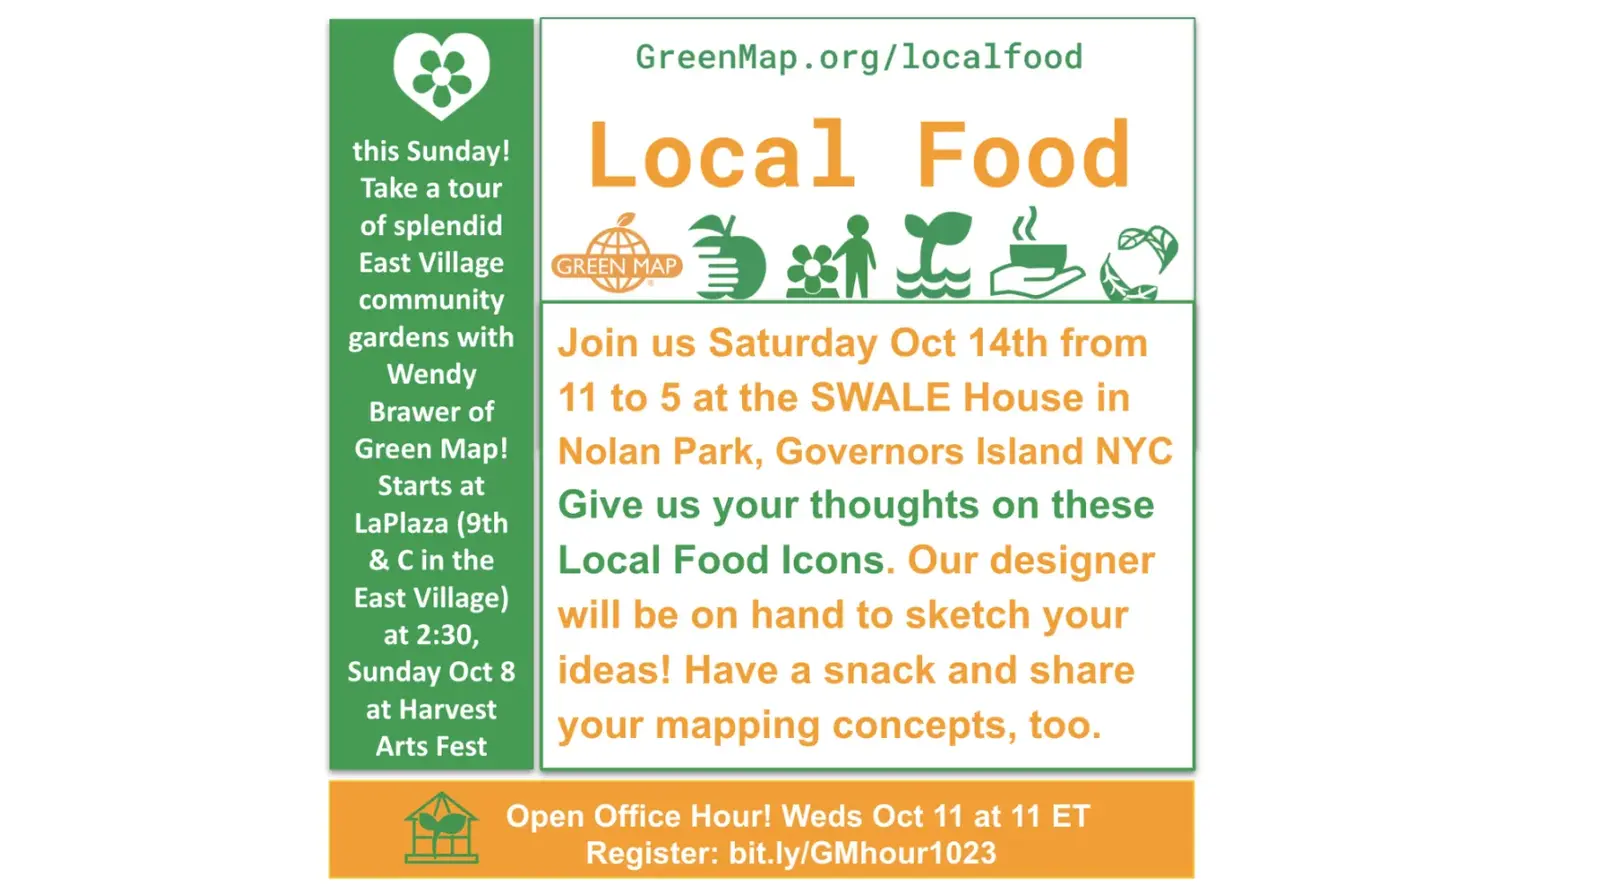 Past Events around NYC in October 2023 that tied into food security and wellbeing